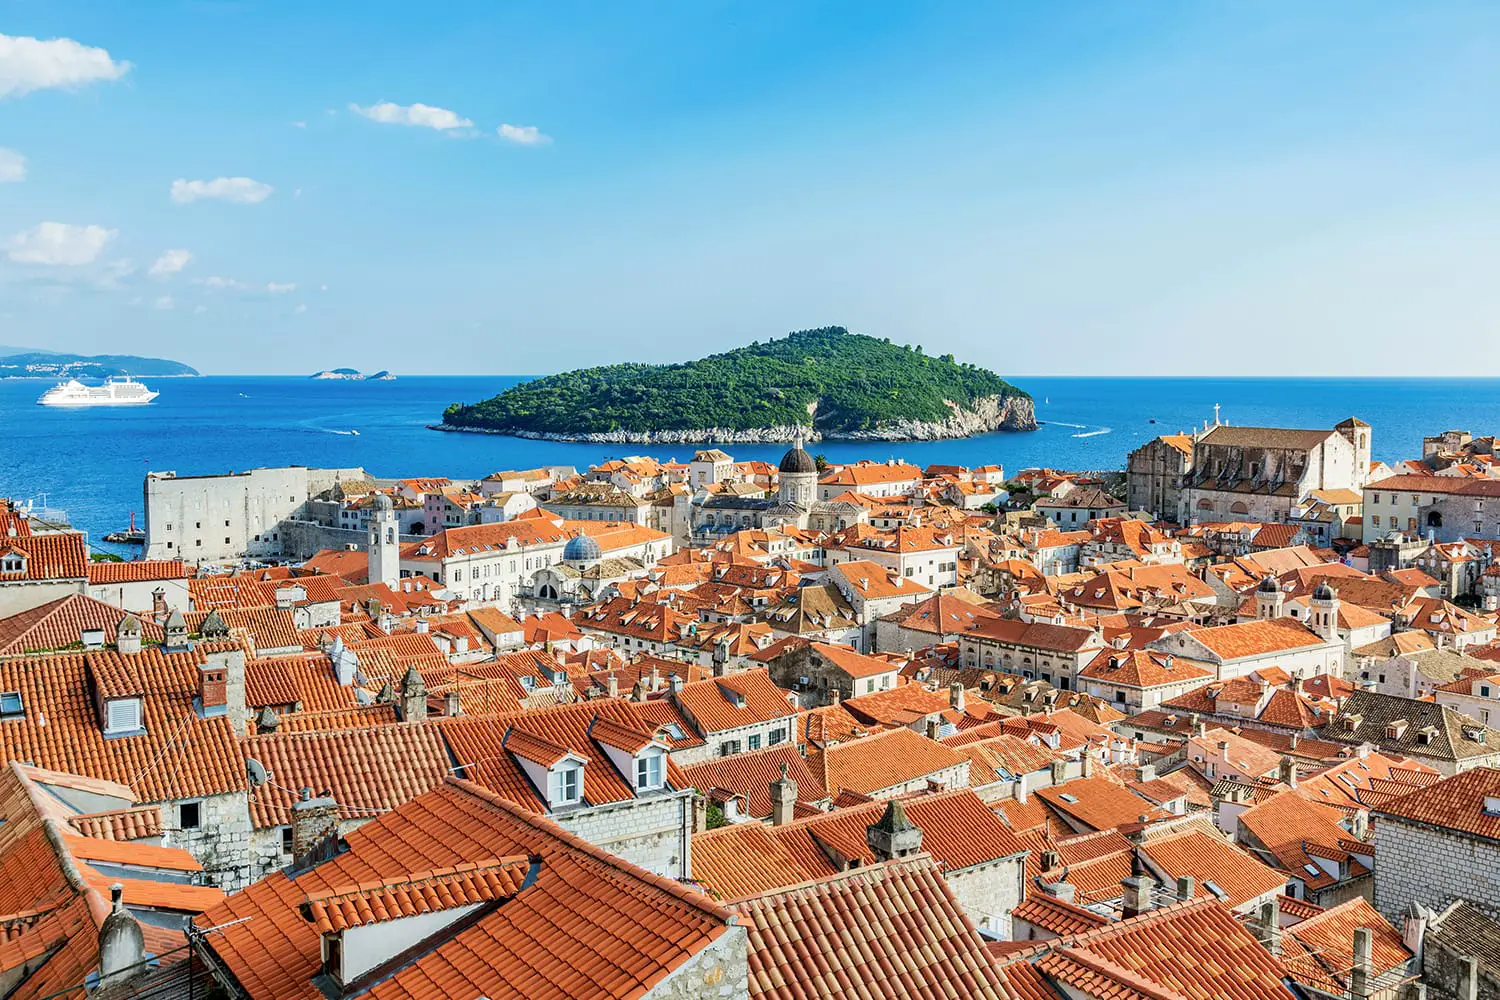 View of Dubrovnik old town and Lokrum island